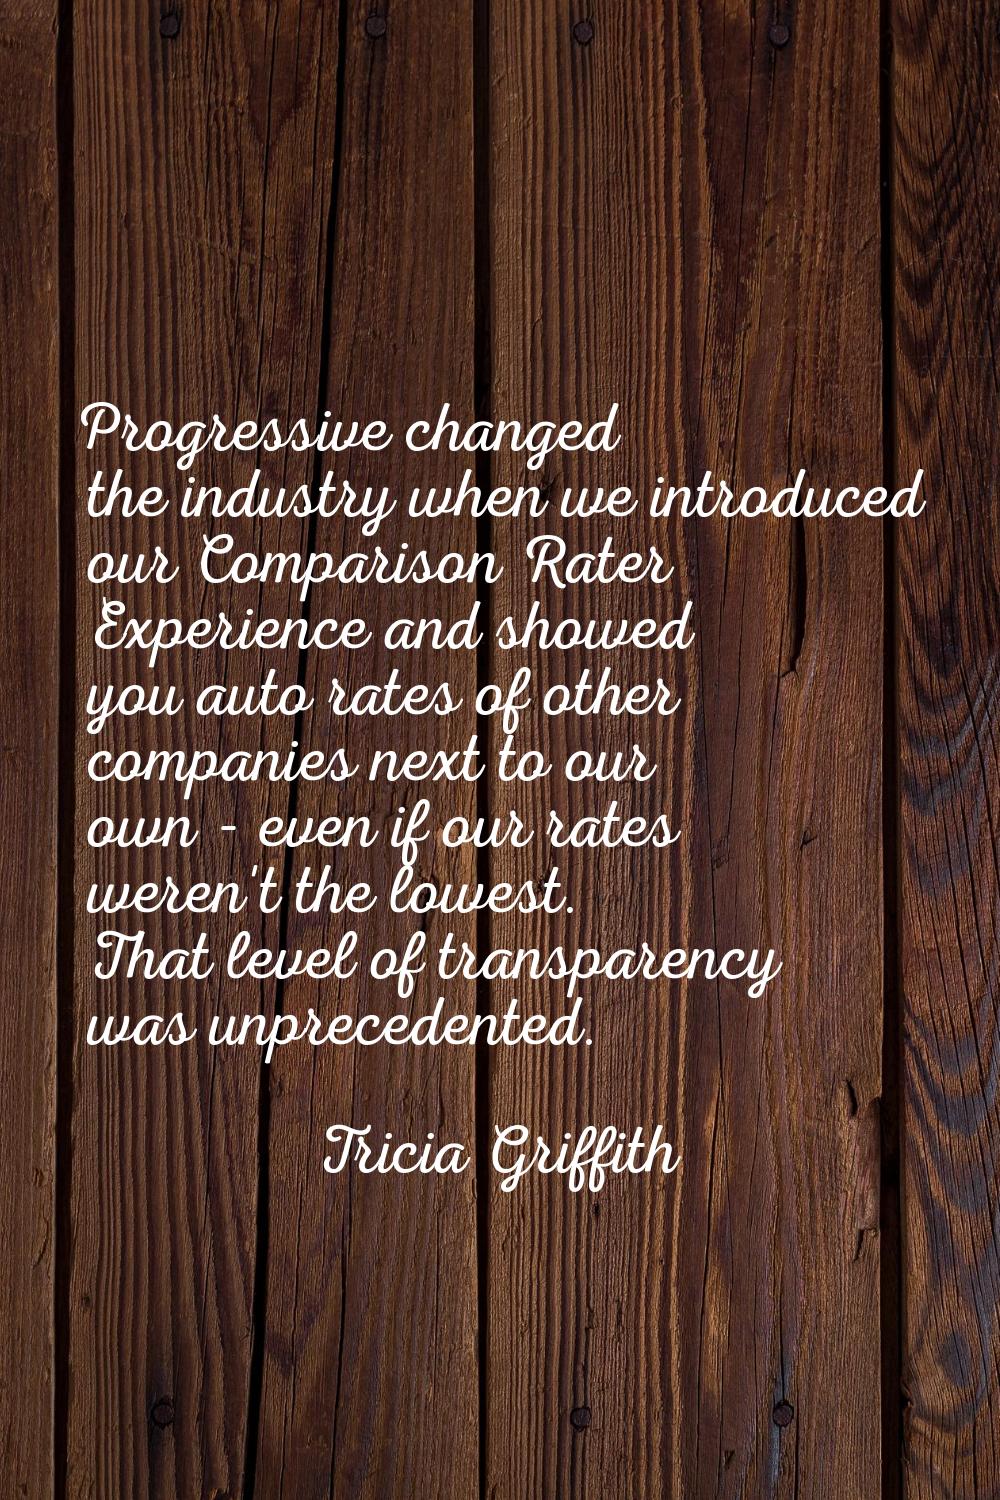 Progressive changed the industry when we introduced our Comparison Rater Experience and showed you 